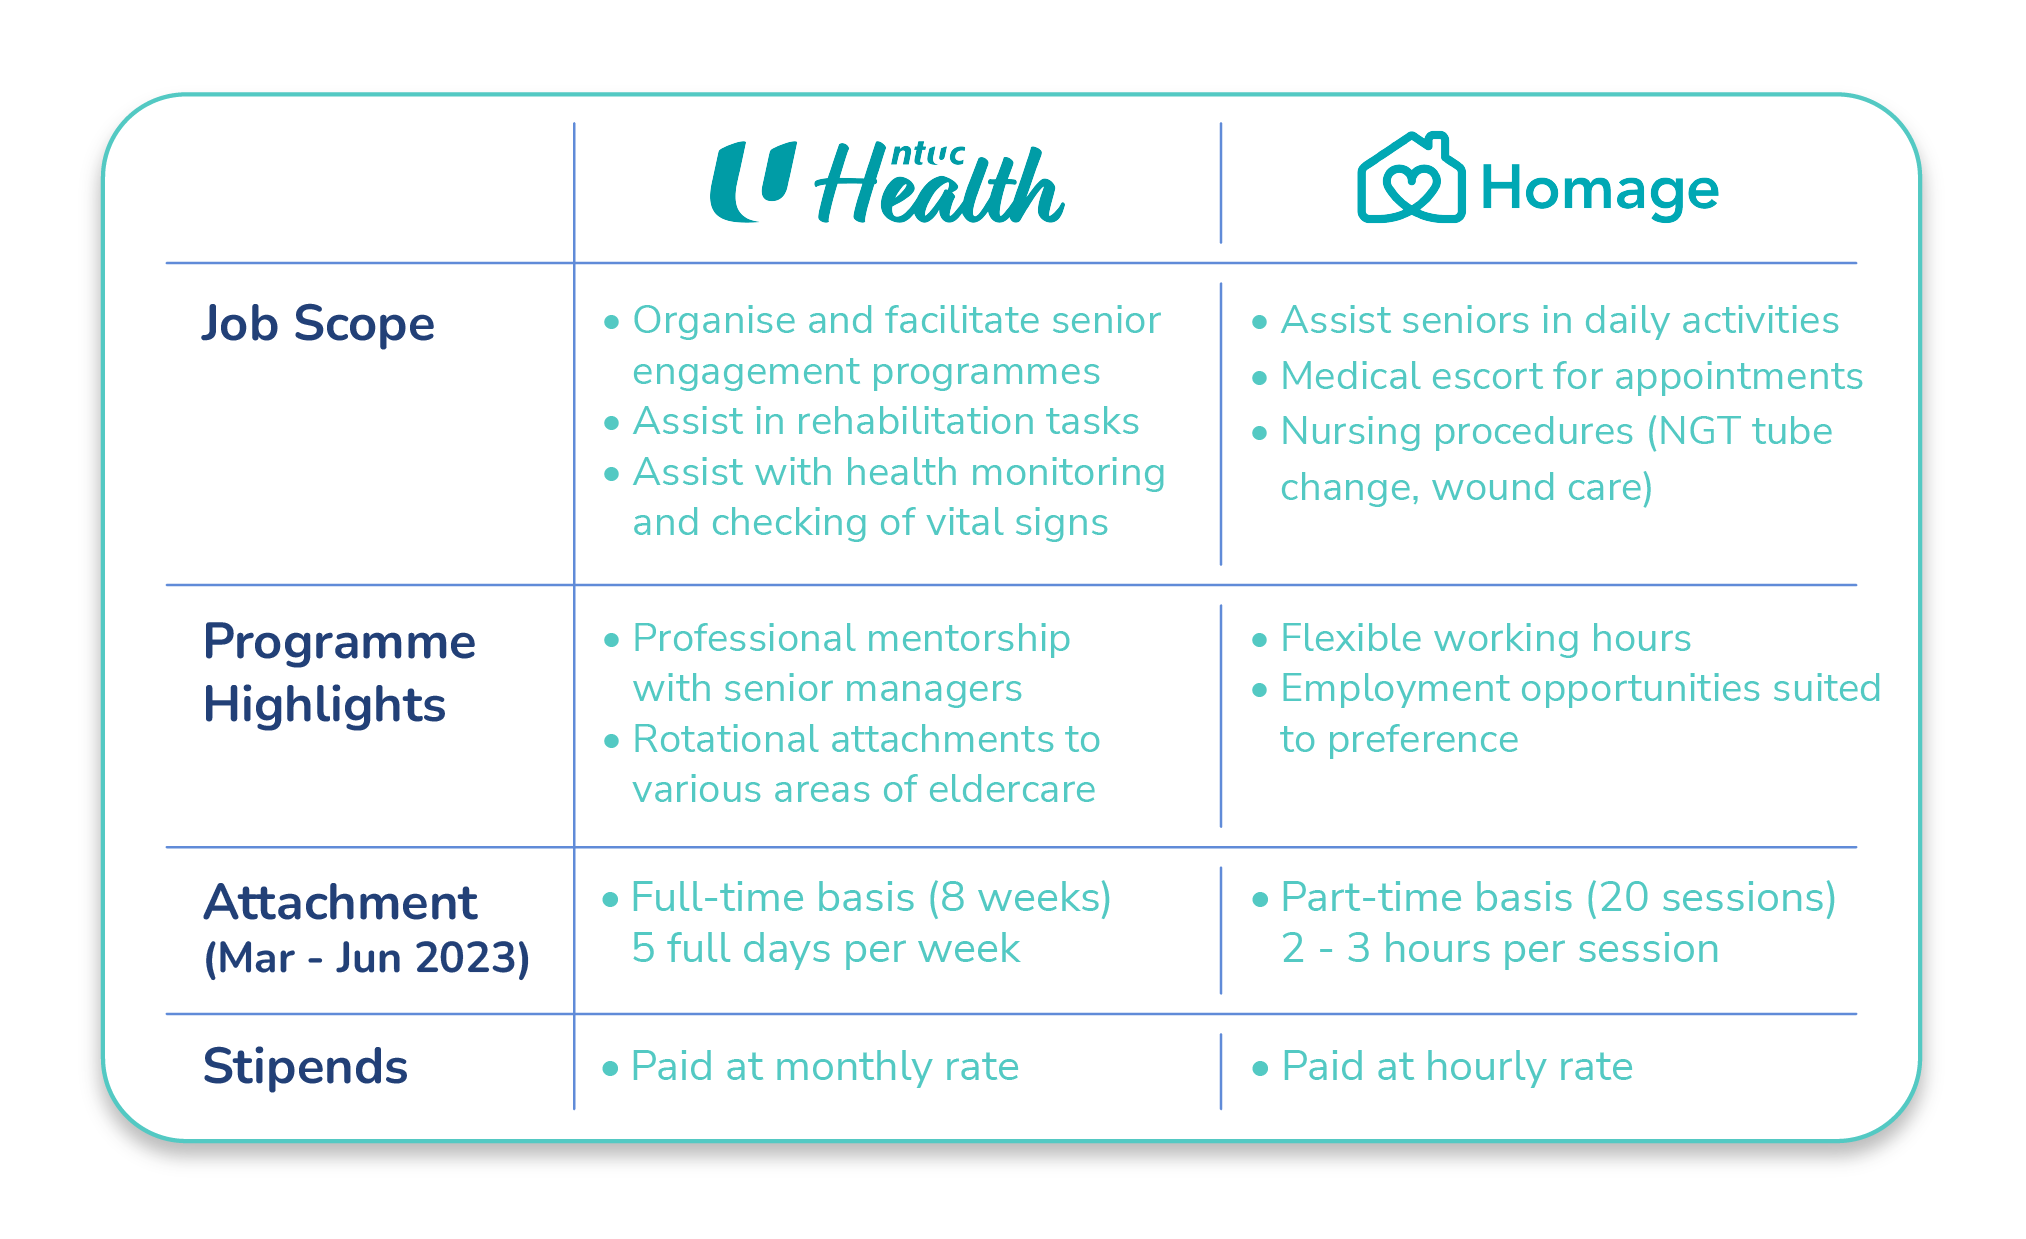 NTUC Health and Homage comparison table